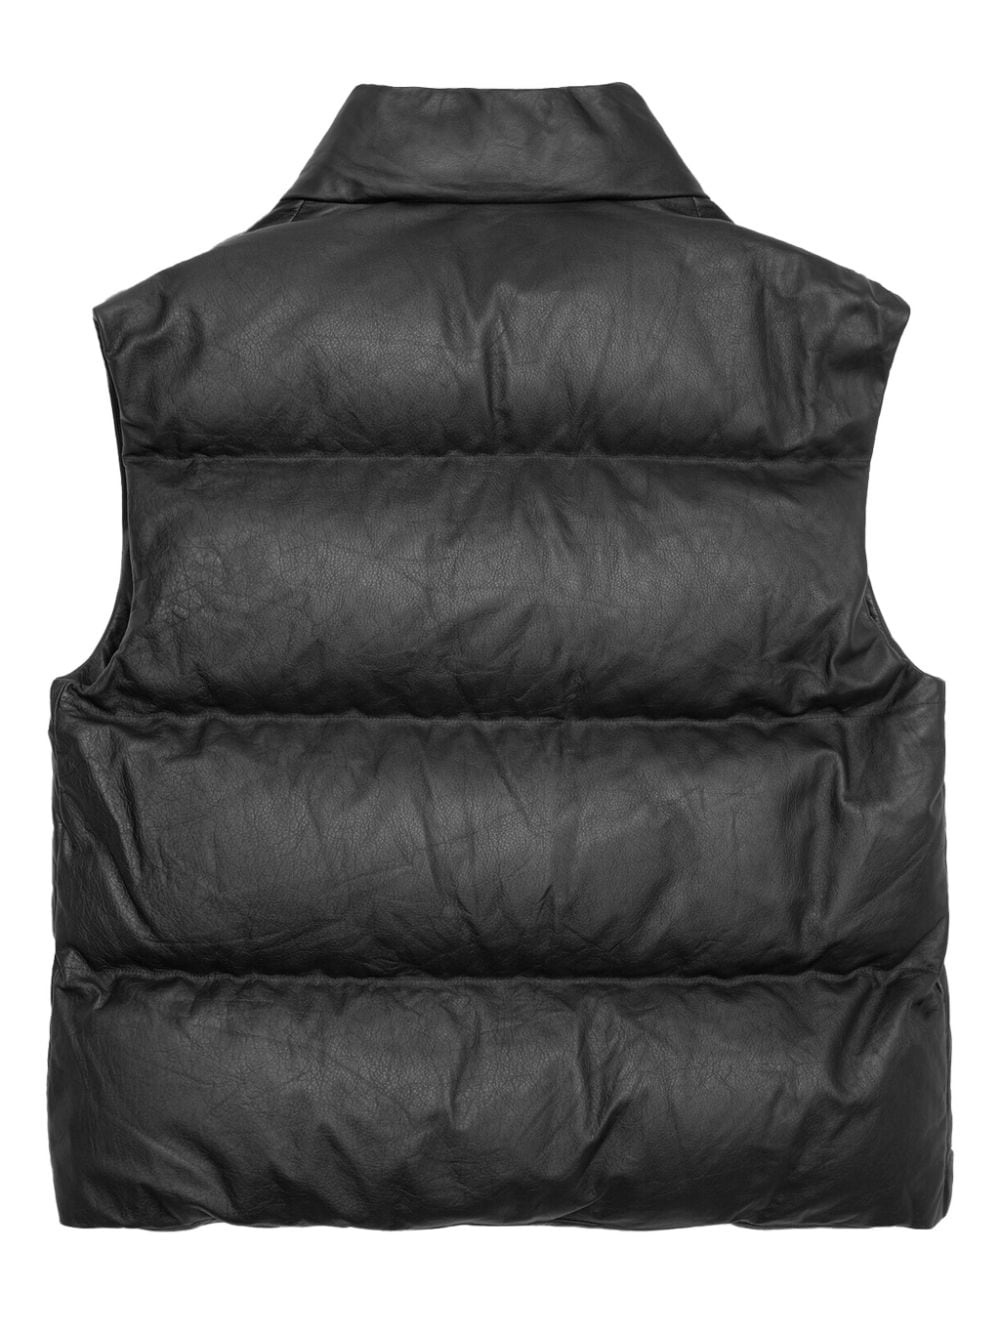 padded leather gilet - 2